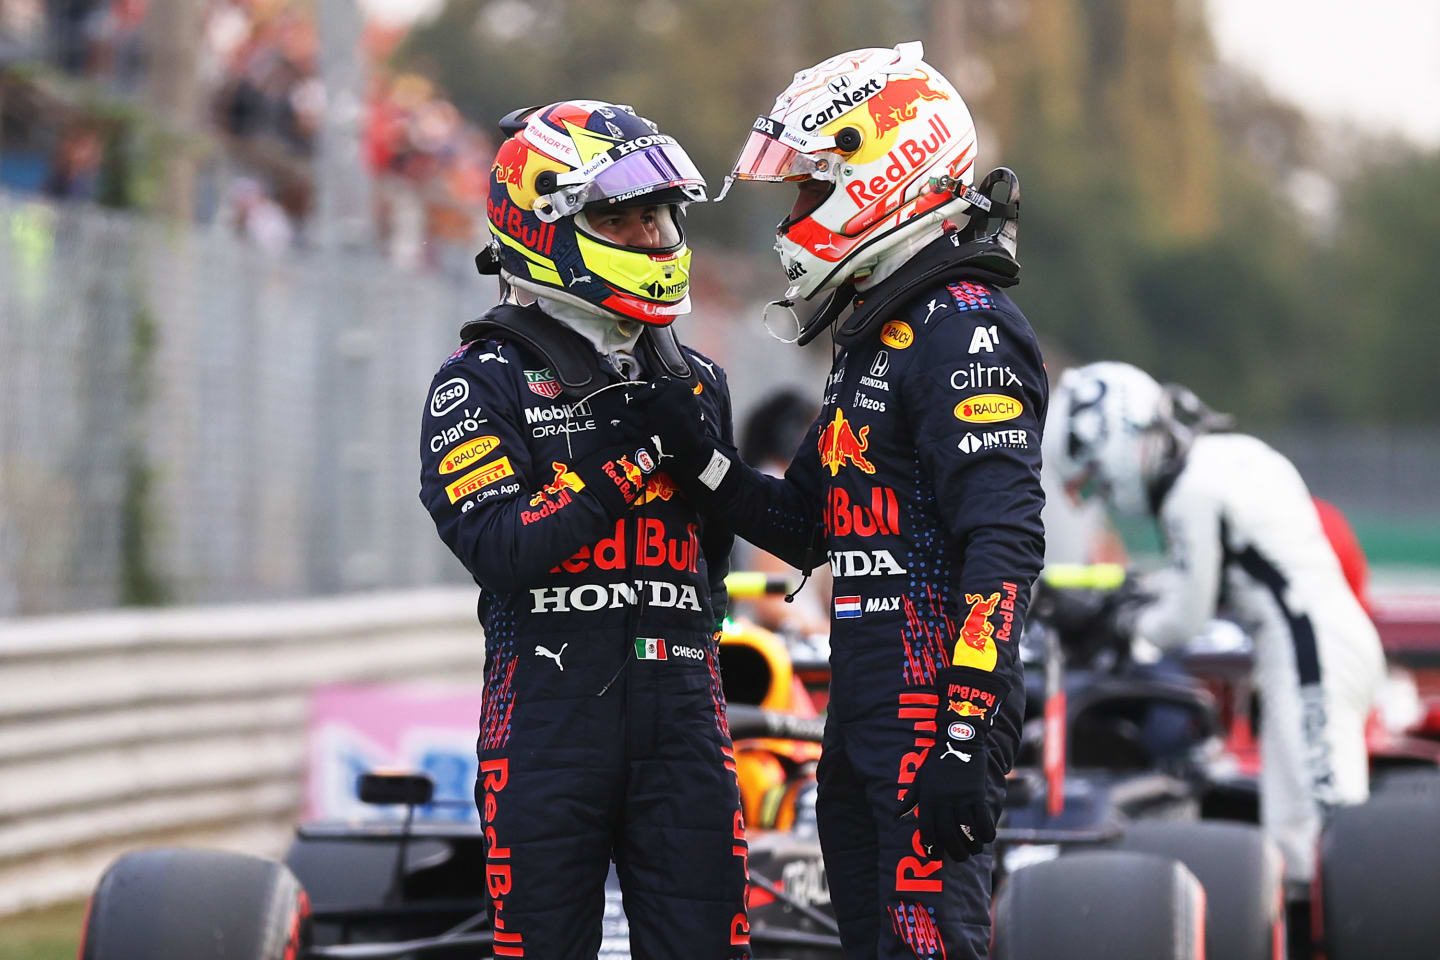 MONZA, ITALY - SEPTEMBER 10: Max Verstappen of Netherlands and Red Bull Racing and Sergio Perez of Mexico and Red Bull Racing talk in parc ferme during qualifying ahead of the F1 Grand Prix of Italy at Autodromo di Monza on September 10, 2021 in Monza, Italy. (Photo by Lars Baron/Getty Images)